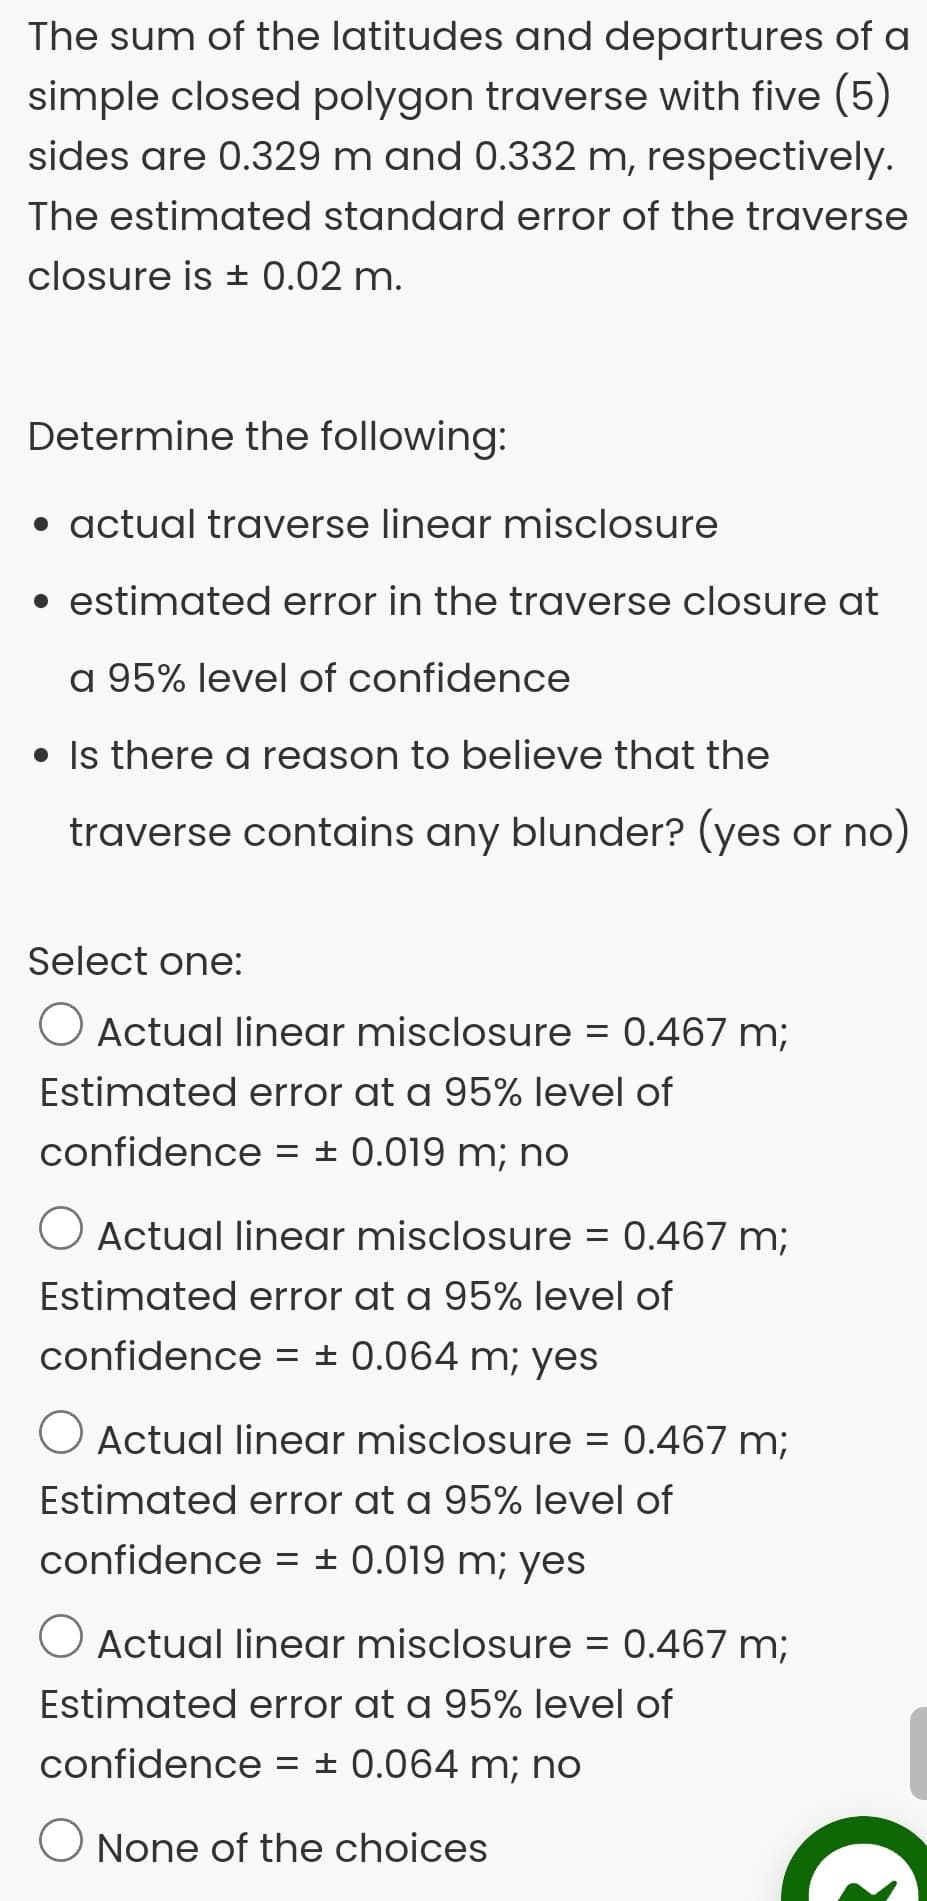 The sum of the latitudes and departures of a
simple closed polygon traverse with five (5)
sides are 0.329 m and 0.332 m, respectively.
The estimated standard error of the traverse
closure is ± 0.02 m.
Determine the following:
• actual traverse linear misclosure
• estimated error in the traverse closure at
a 95% level of confidence
• Is there a reason to believe that the
traverse contains any blunder? (yes or no)
Select one:
O Actual linear misclosure = 0.467 m;
Estimated error at a 95% level of
confidence
= ± 0.019 m; no
O Actual linear misclosure = 0.467 m;
Estimated error at a 95% level of
confidence
= ± 0.064 m; yes
O Actual linear misclosure
= 0.467 m;
Estimated error at a 95% level of
confidence = ± 0.019 m; yes
O Actual linear misclosure = 0.467 m;
Estimated error at a 95% level of
confidence
= ± 0.064 m; no
None of the choices
